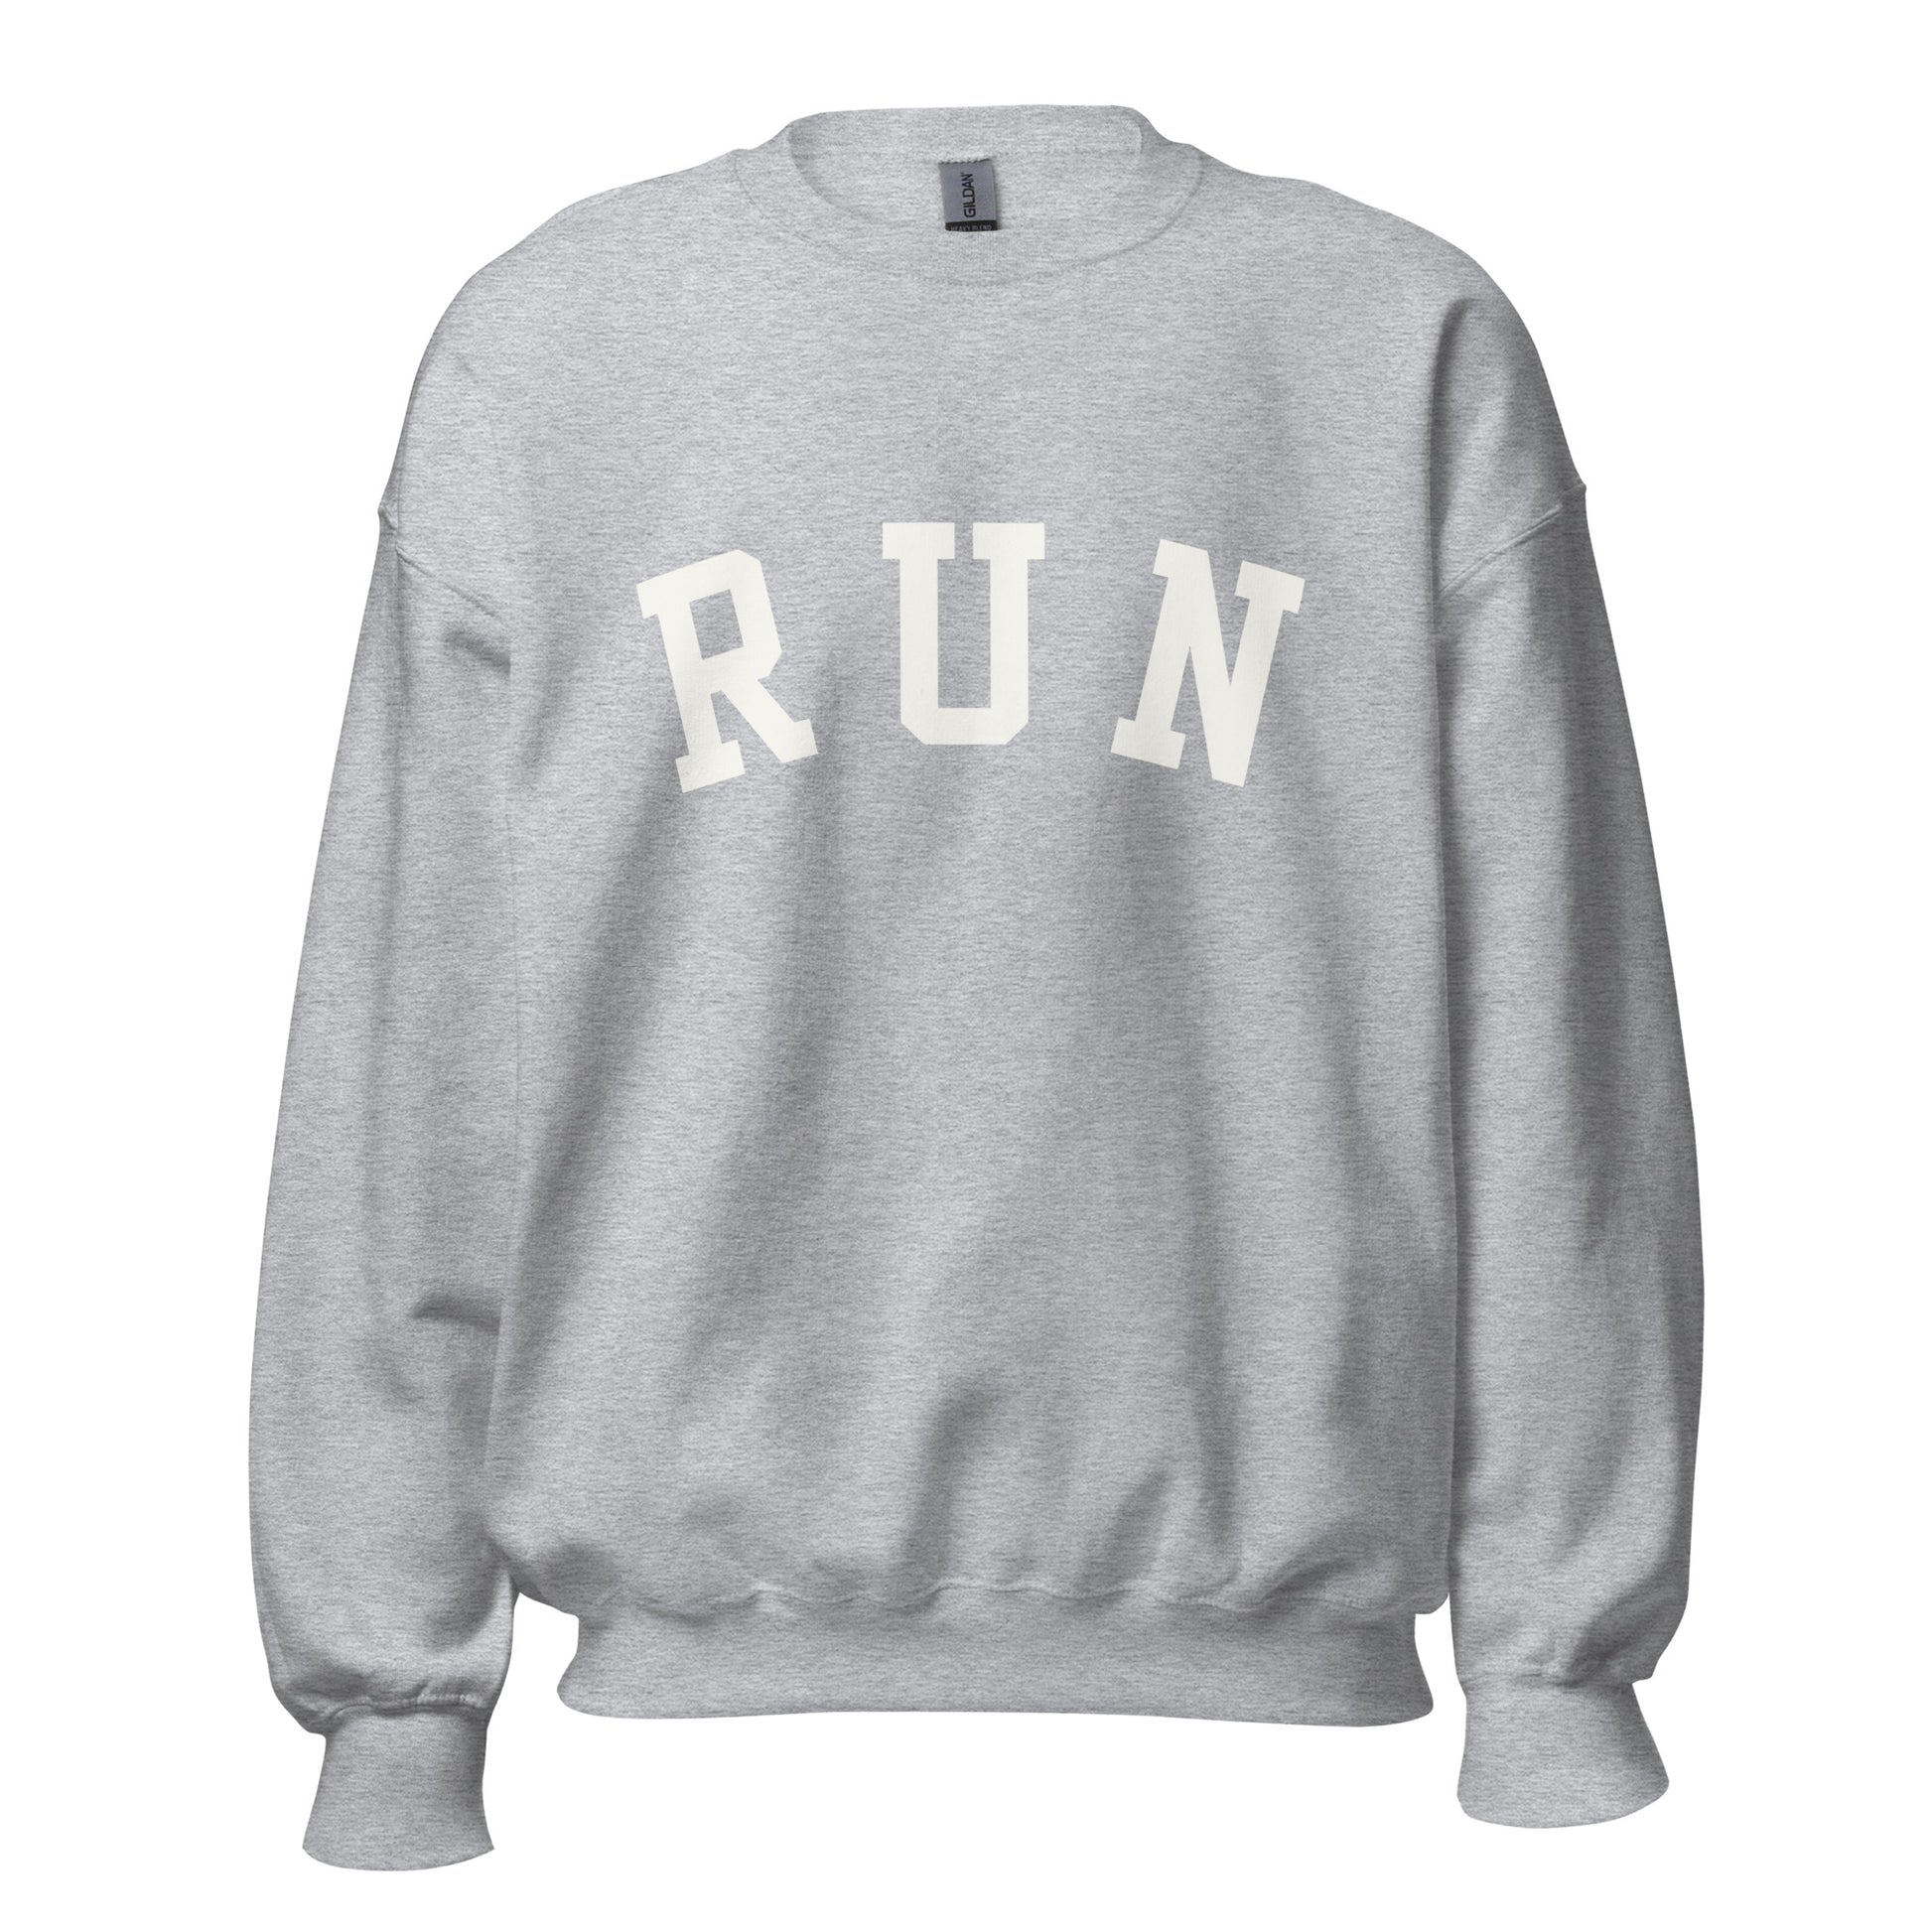 light grey unisex sweatshirt with the word run across the chest in a bold varsity style font